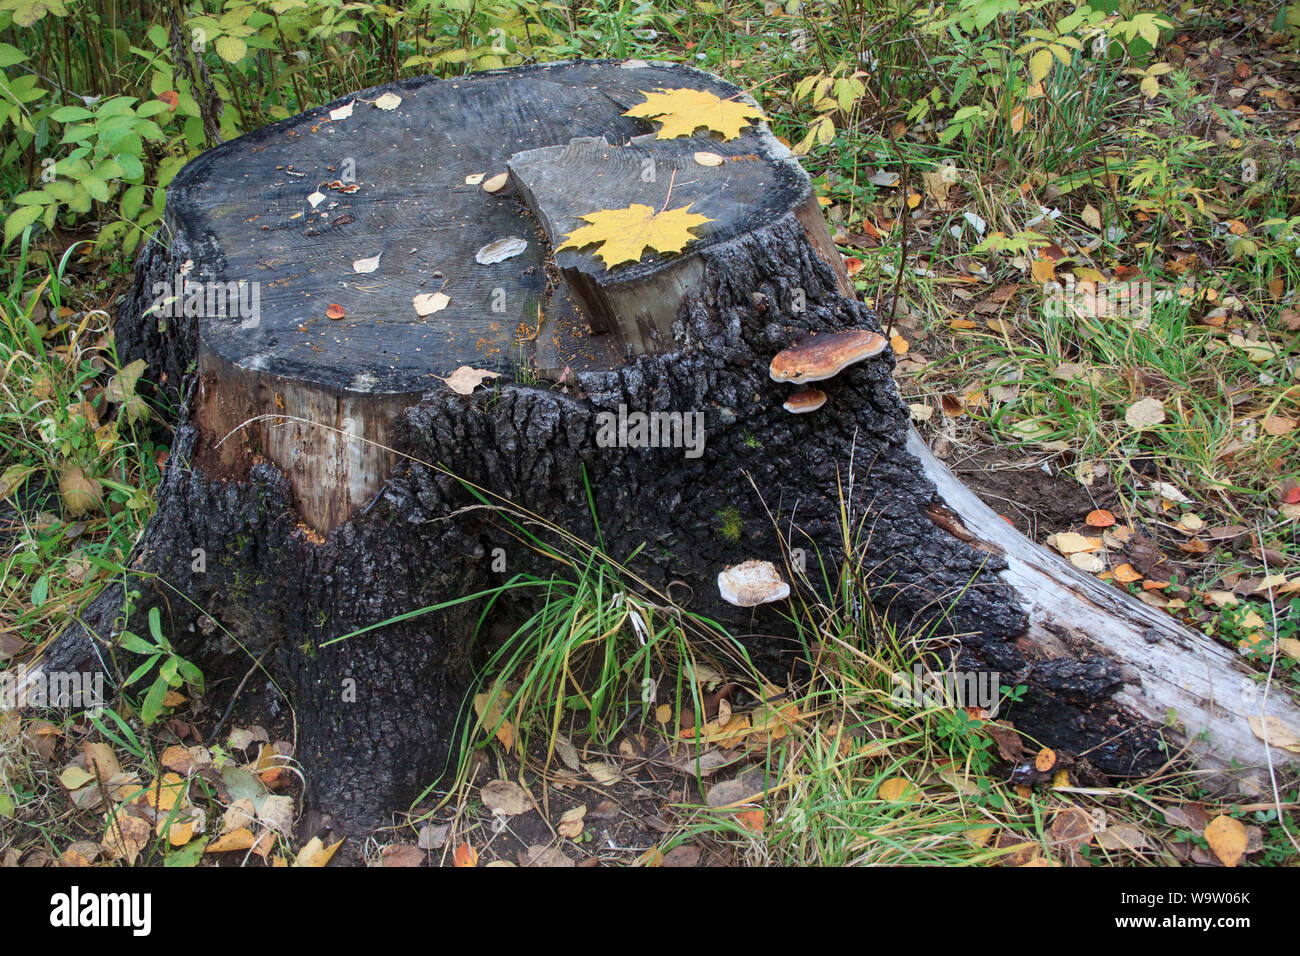 Two parasitic fungus are growing on a old stump. Yellow maple leaves. Seasons of the year. Live nature. Stock Photo